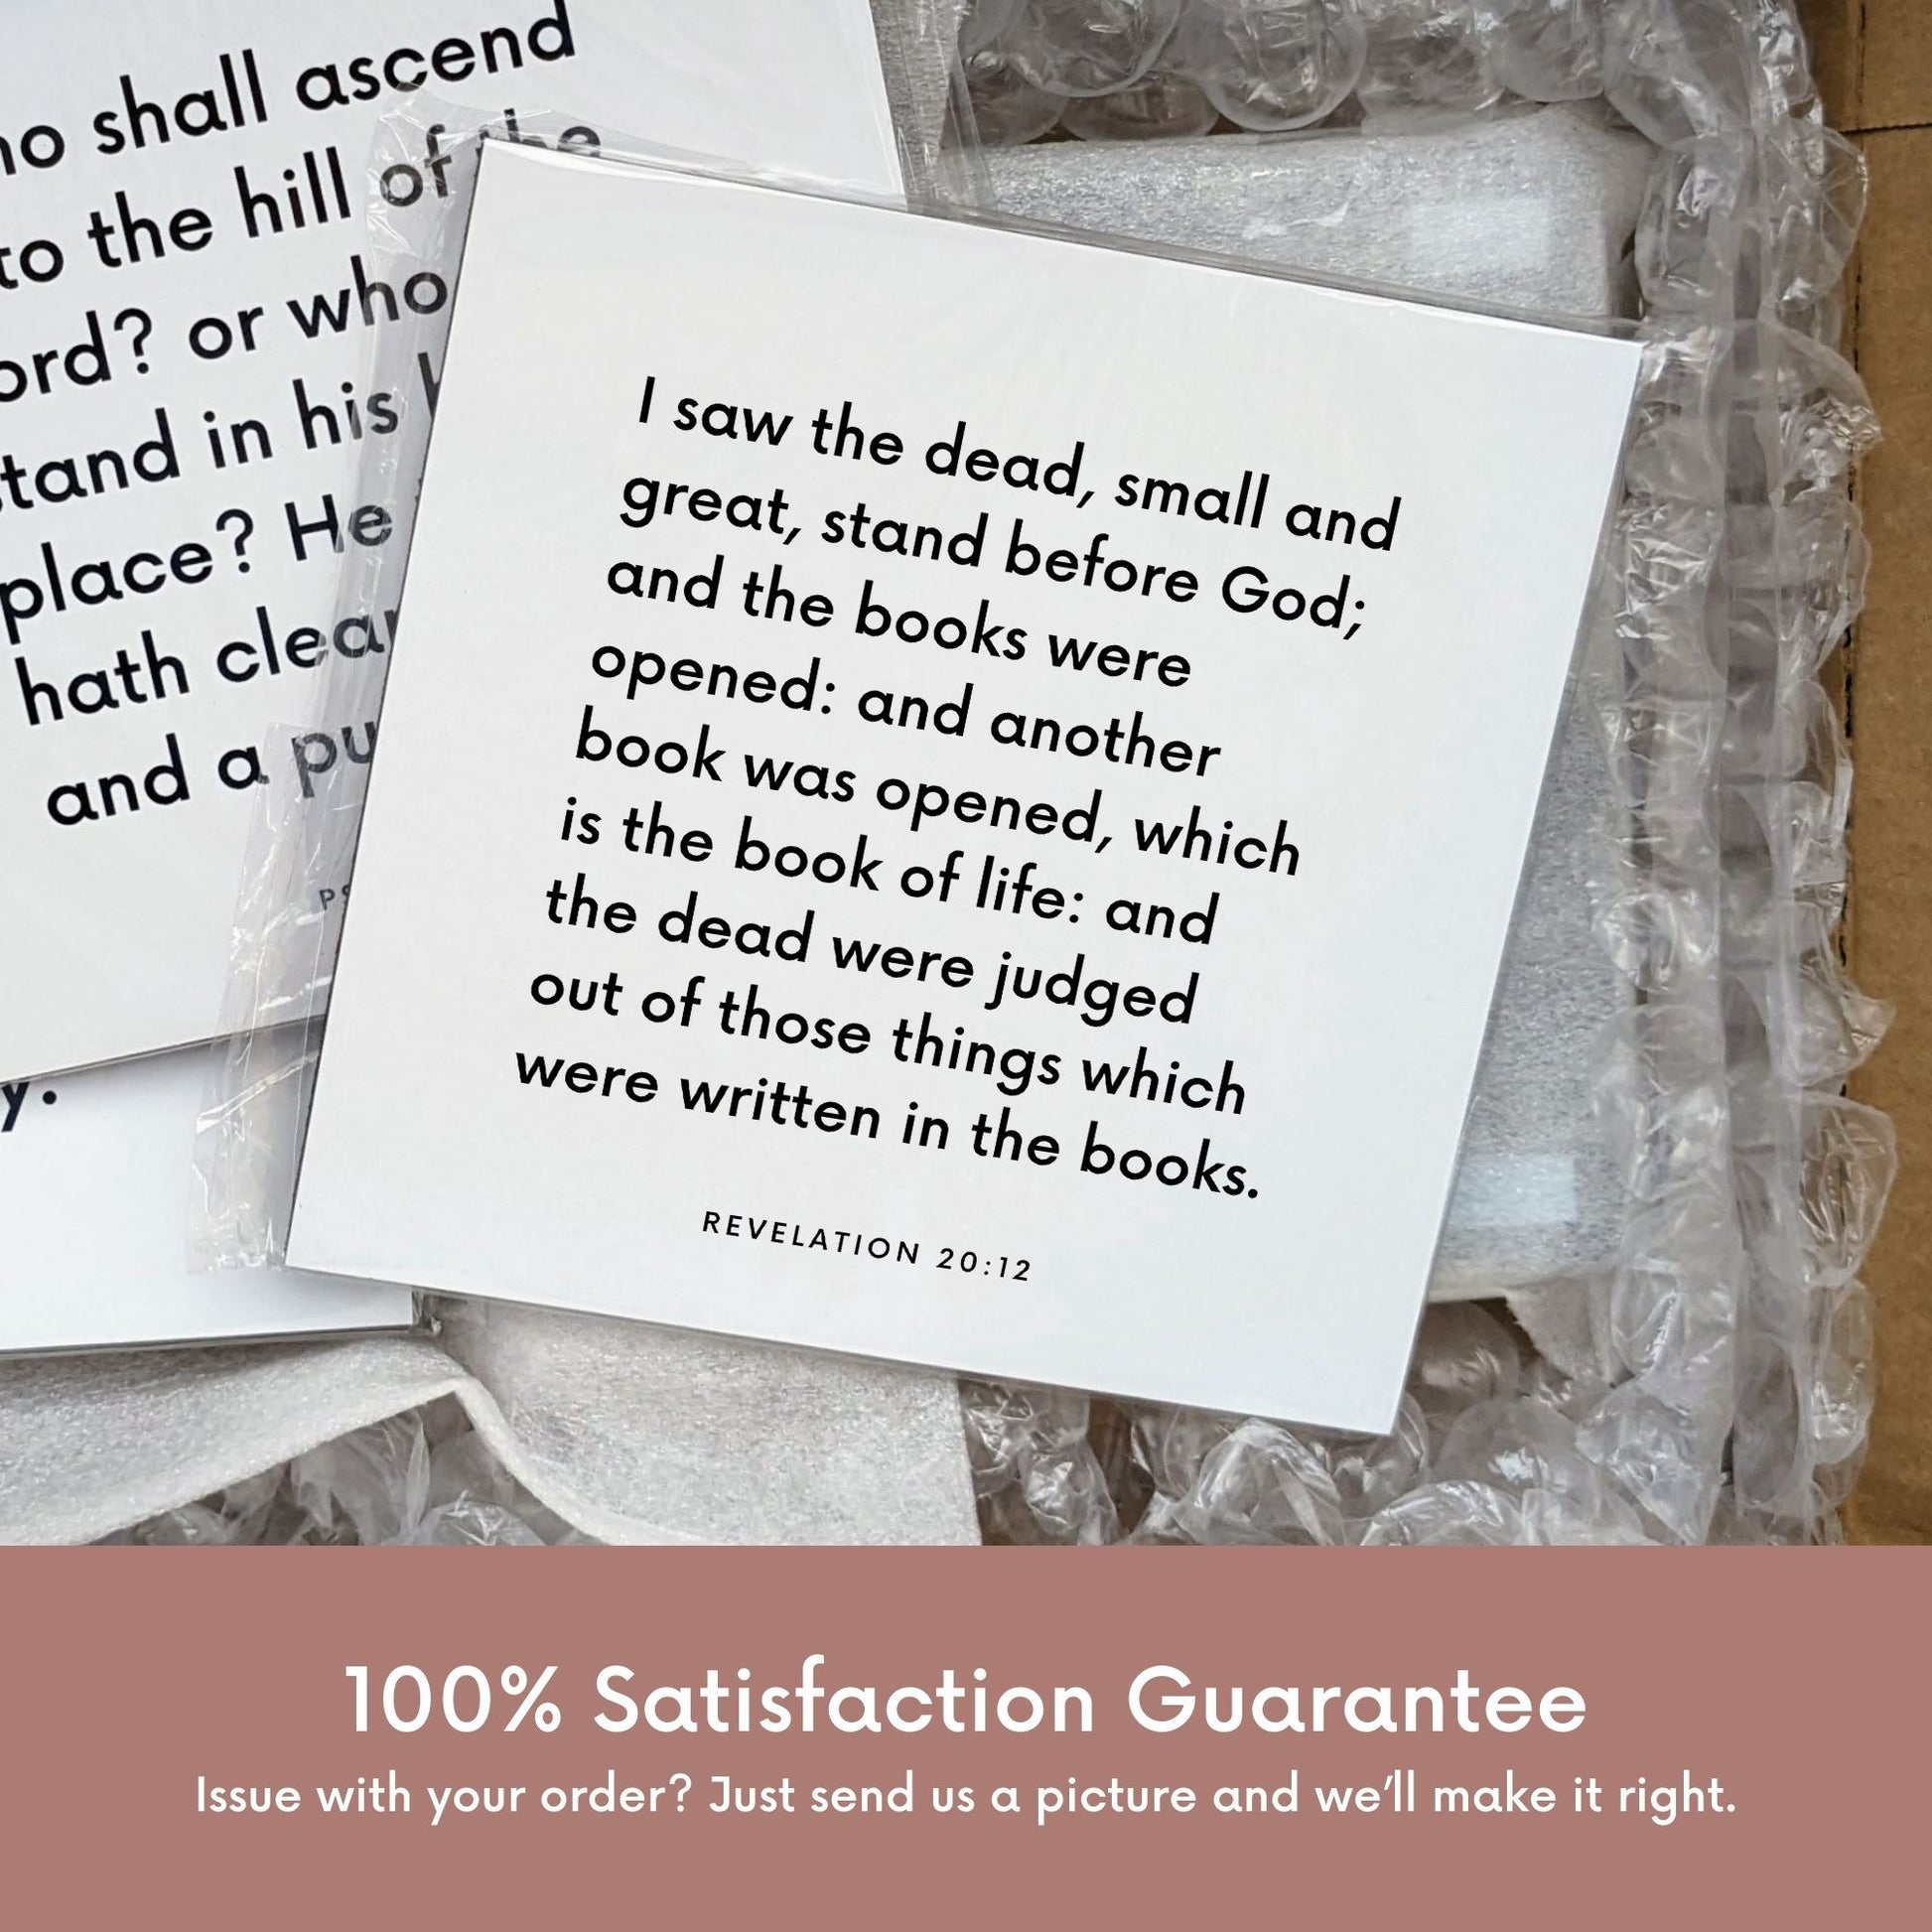 Shipping materials for scripture tile of Revelation 20:12 - "I saw the dead, small and great, stand before God"